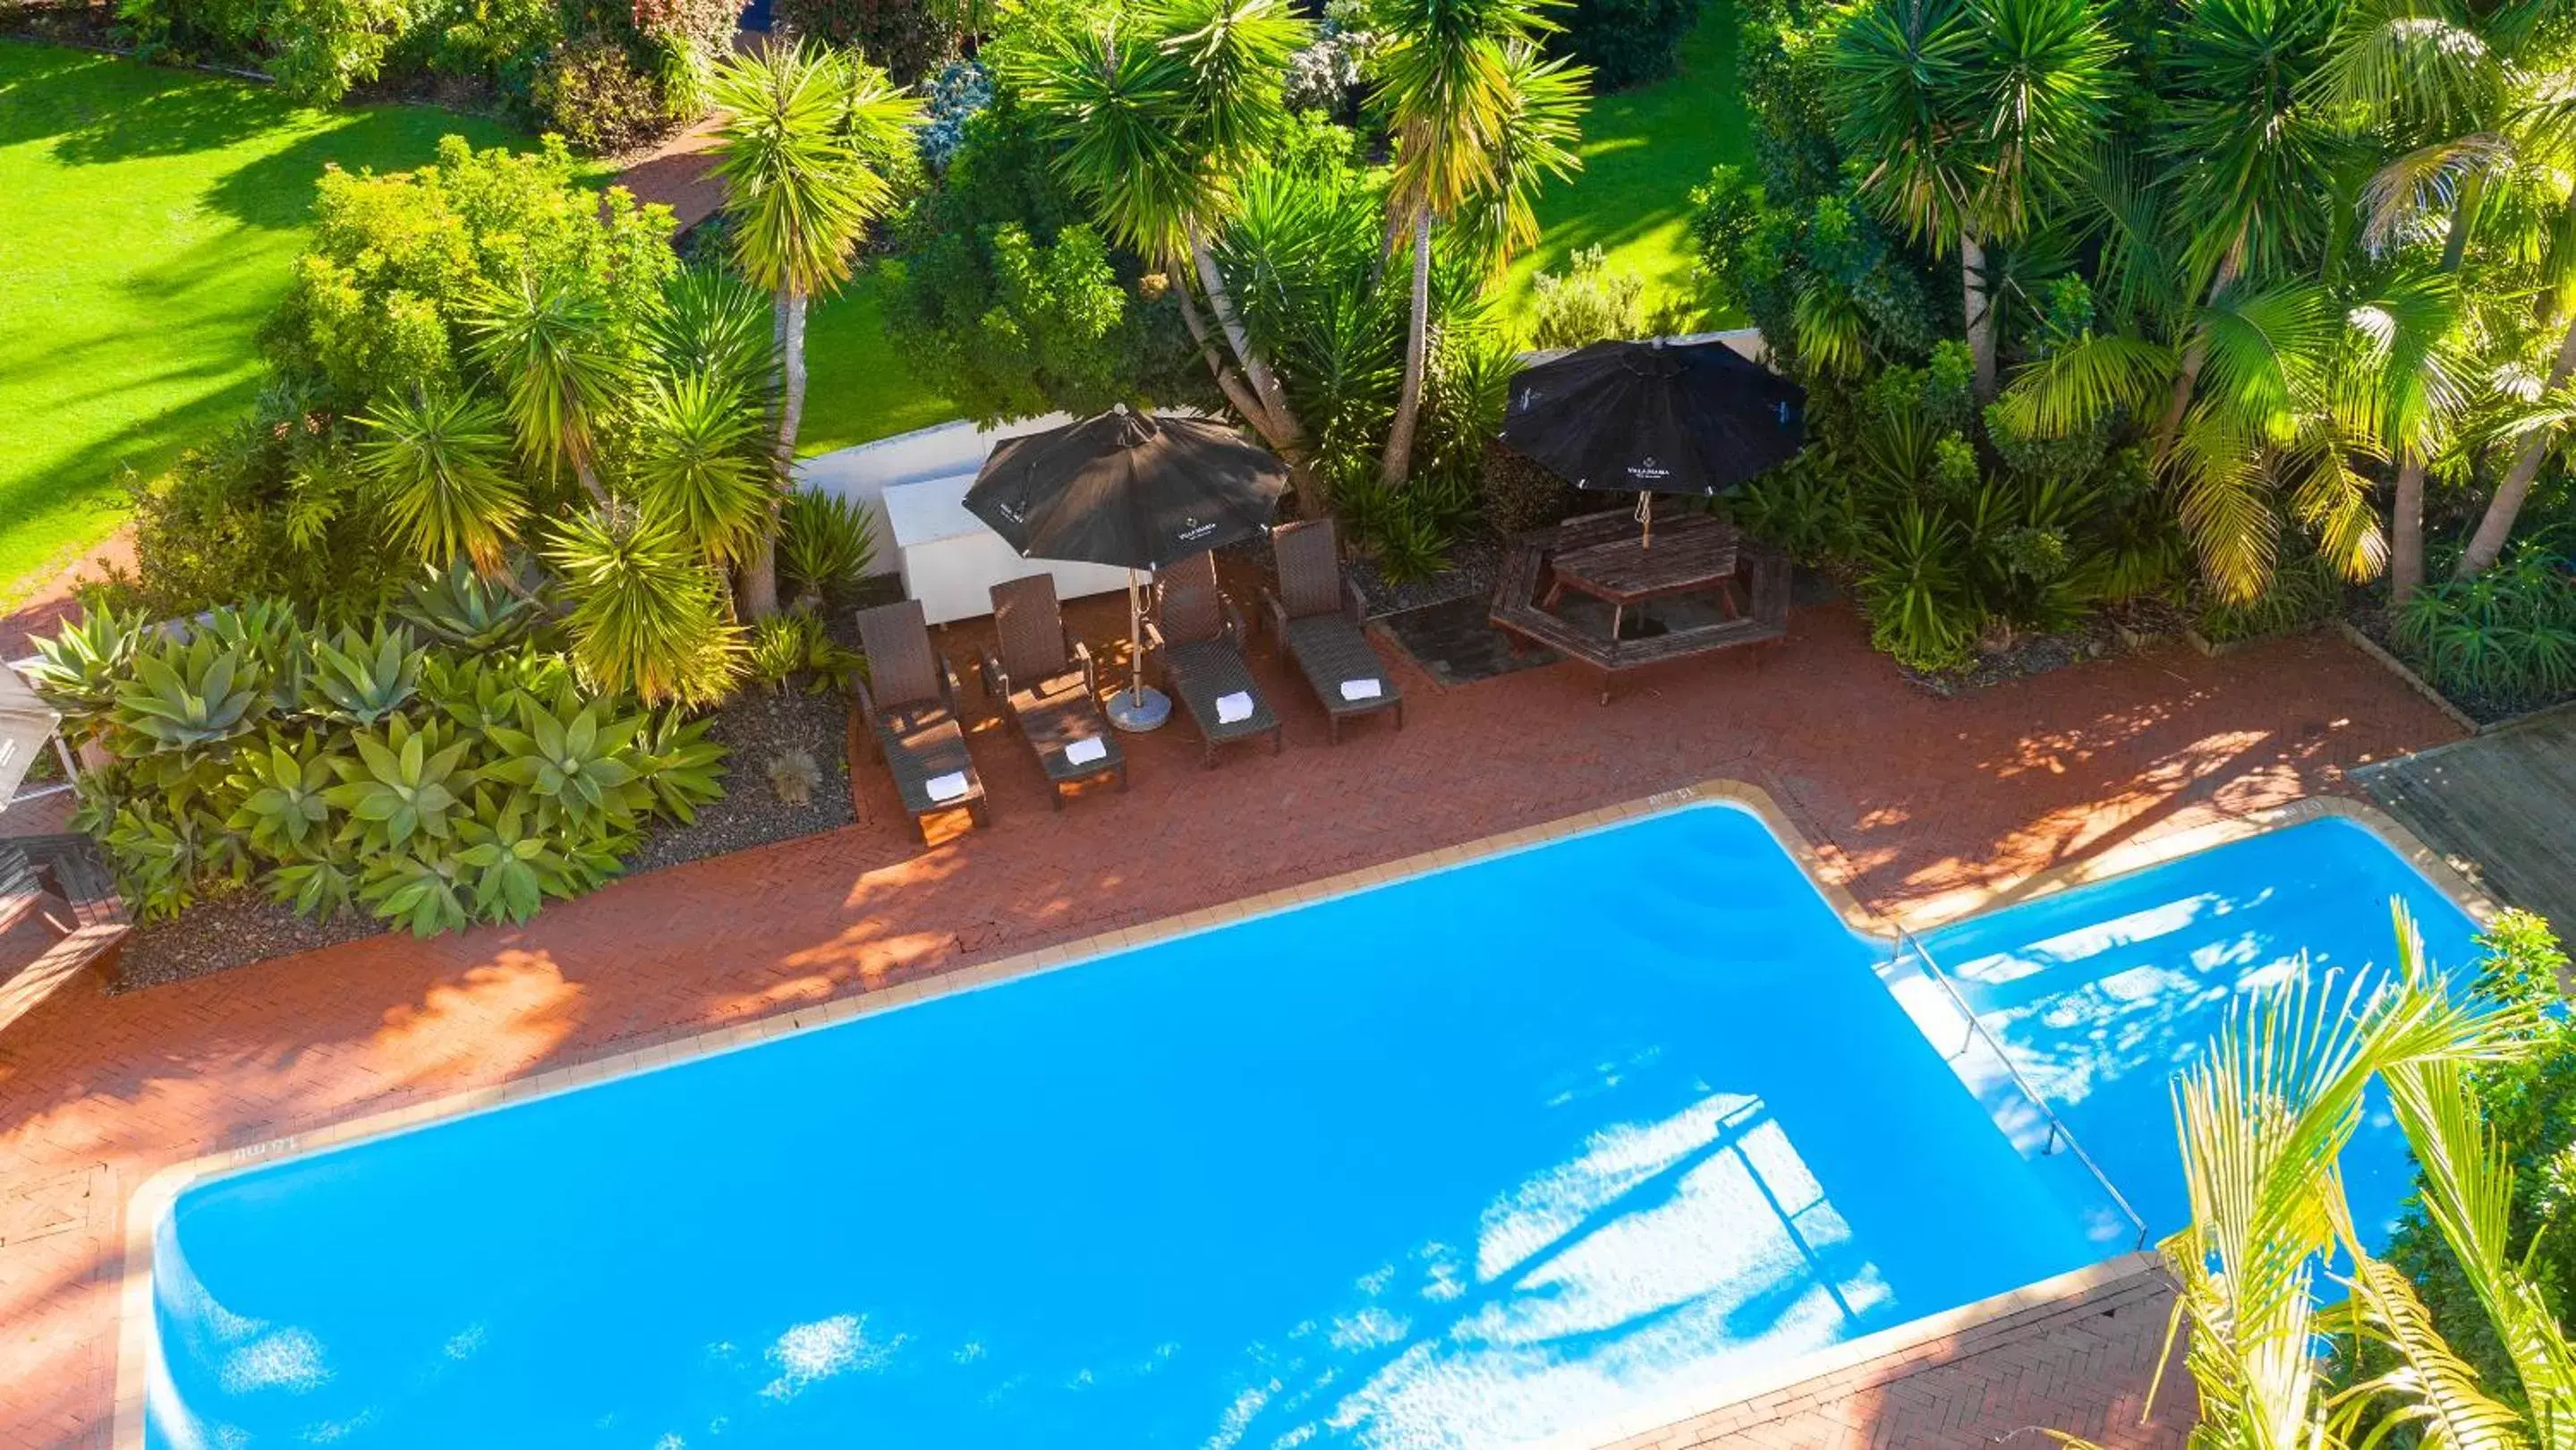 Bird's eye view, Pool View in Scenic Hotel Bay of Islands